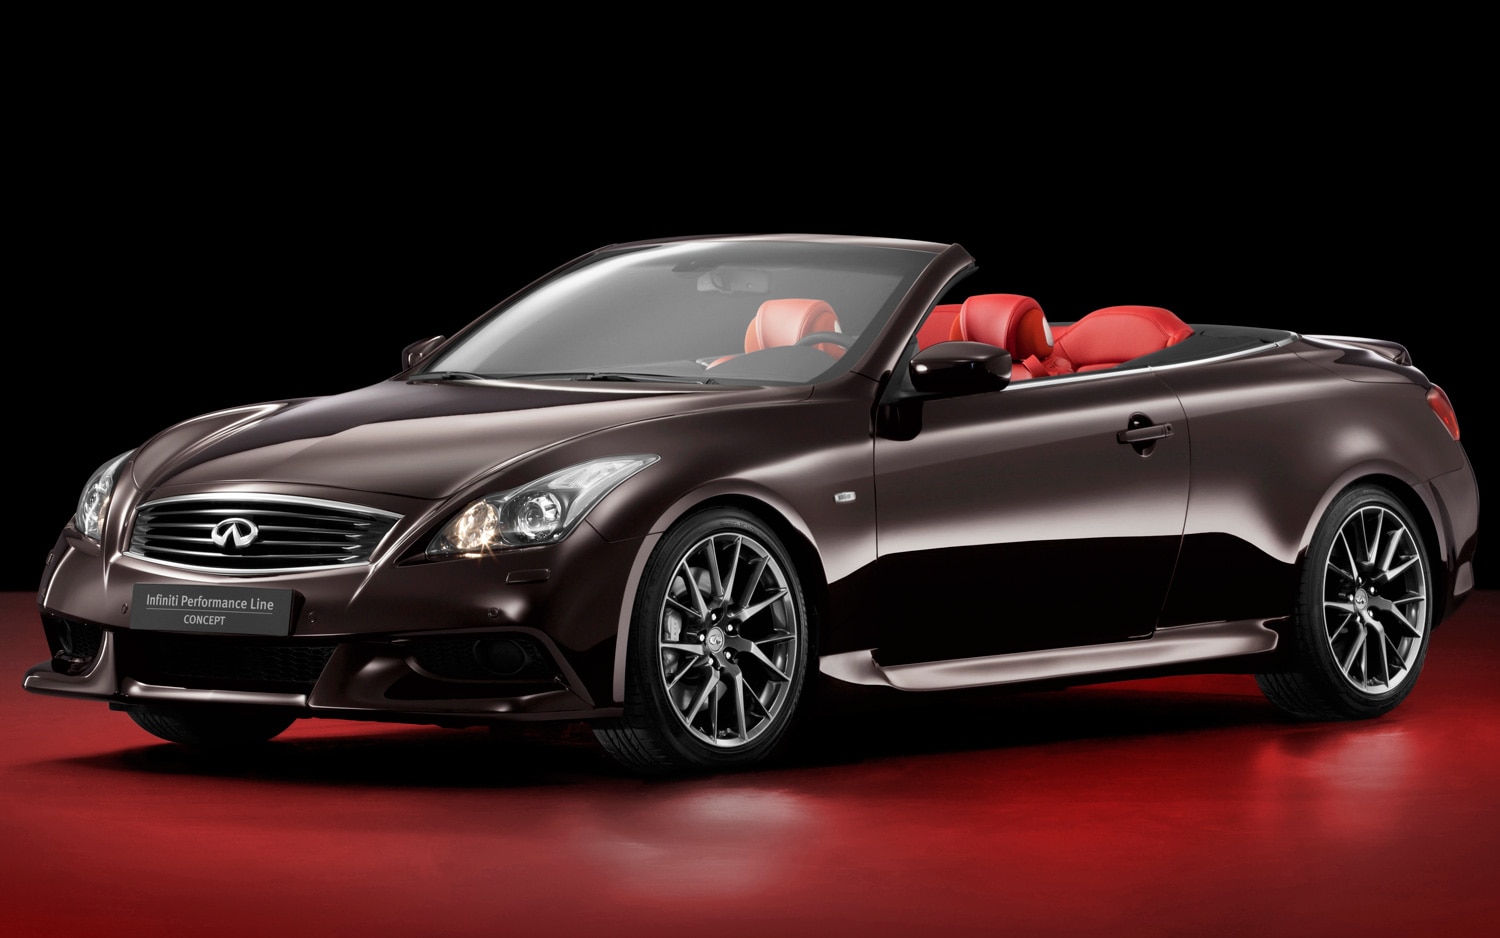 2013 Infiniti G37 IPL Convertible Confirmed For Production